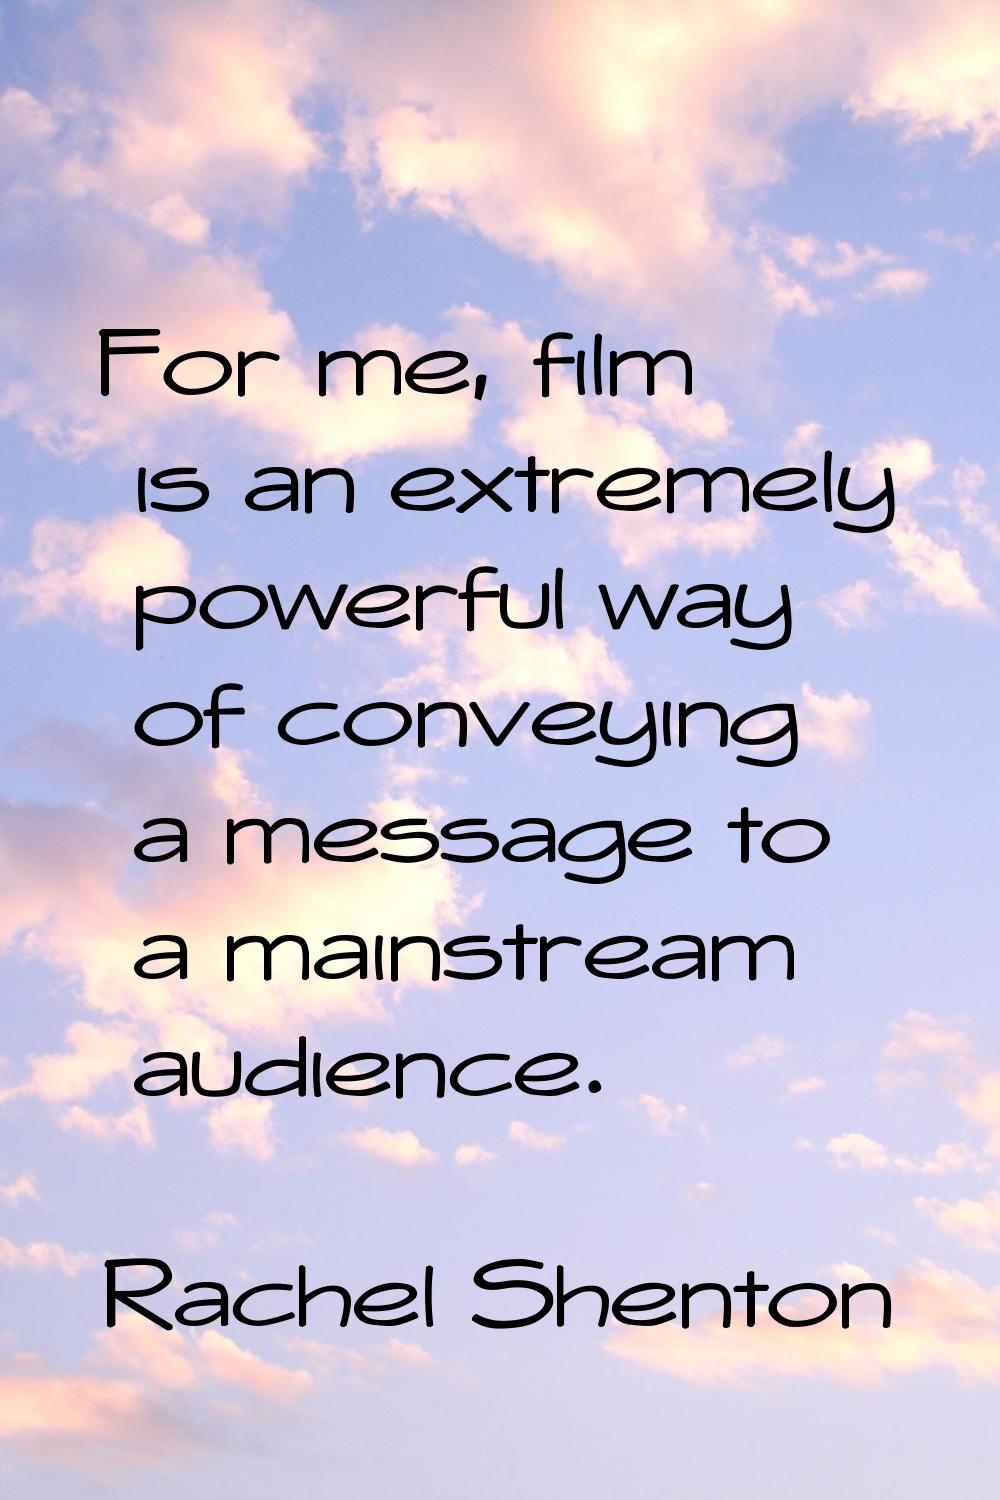 For me, film is an extremely powerful way of conveying a message to a mainstream audience.